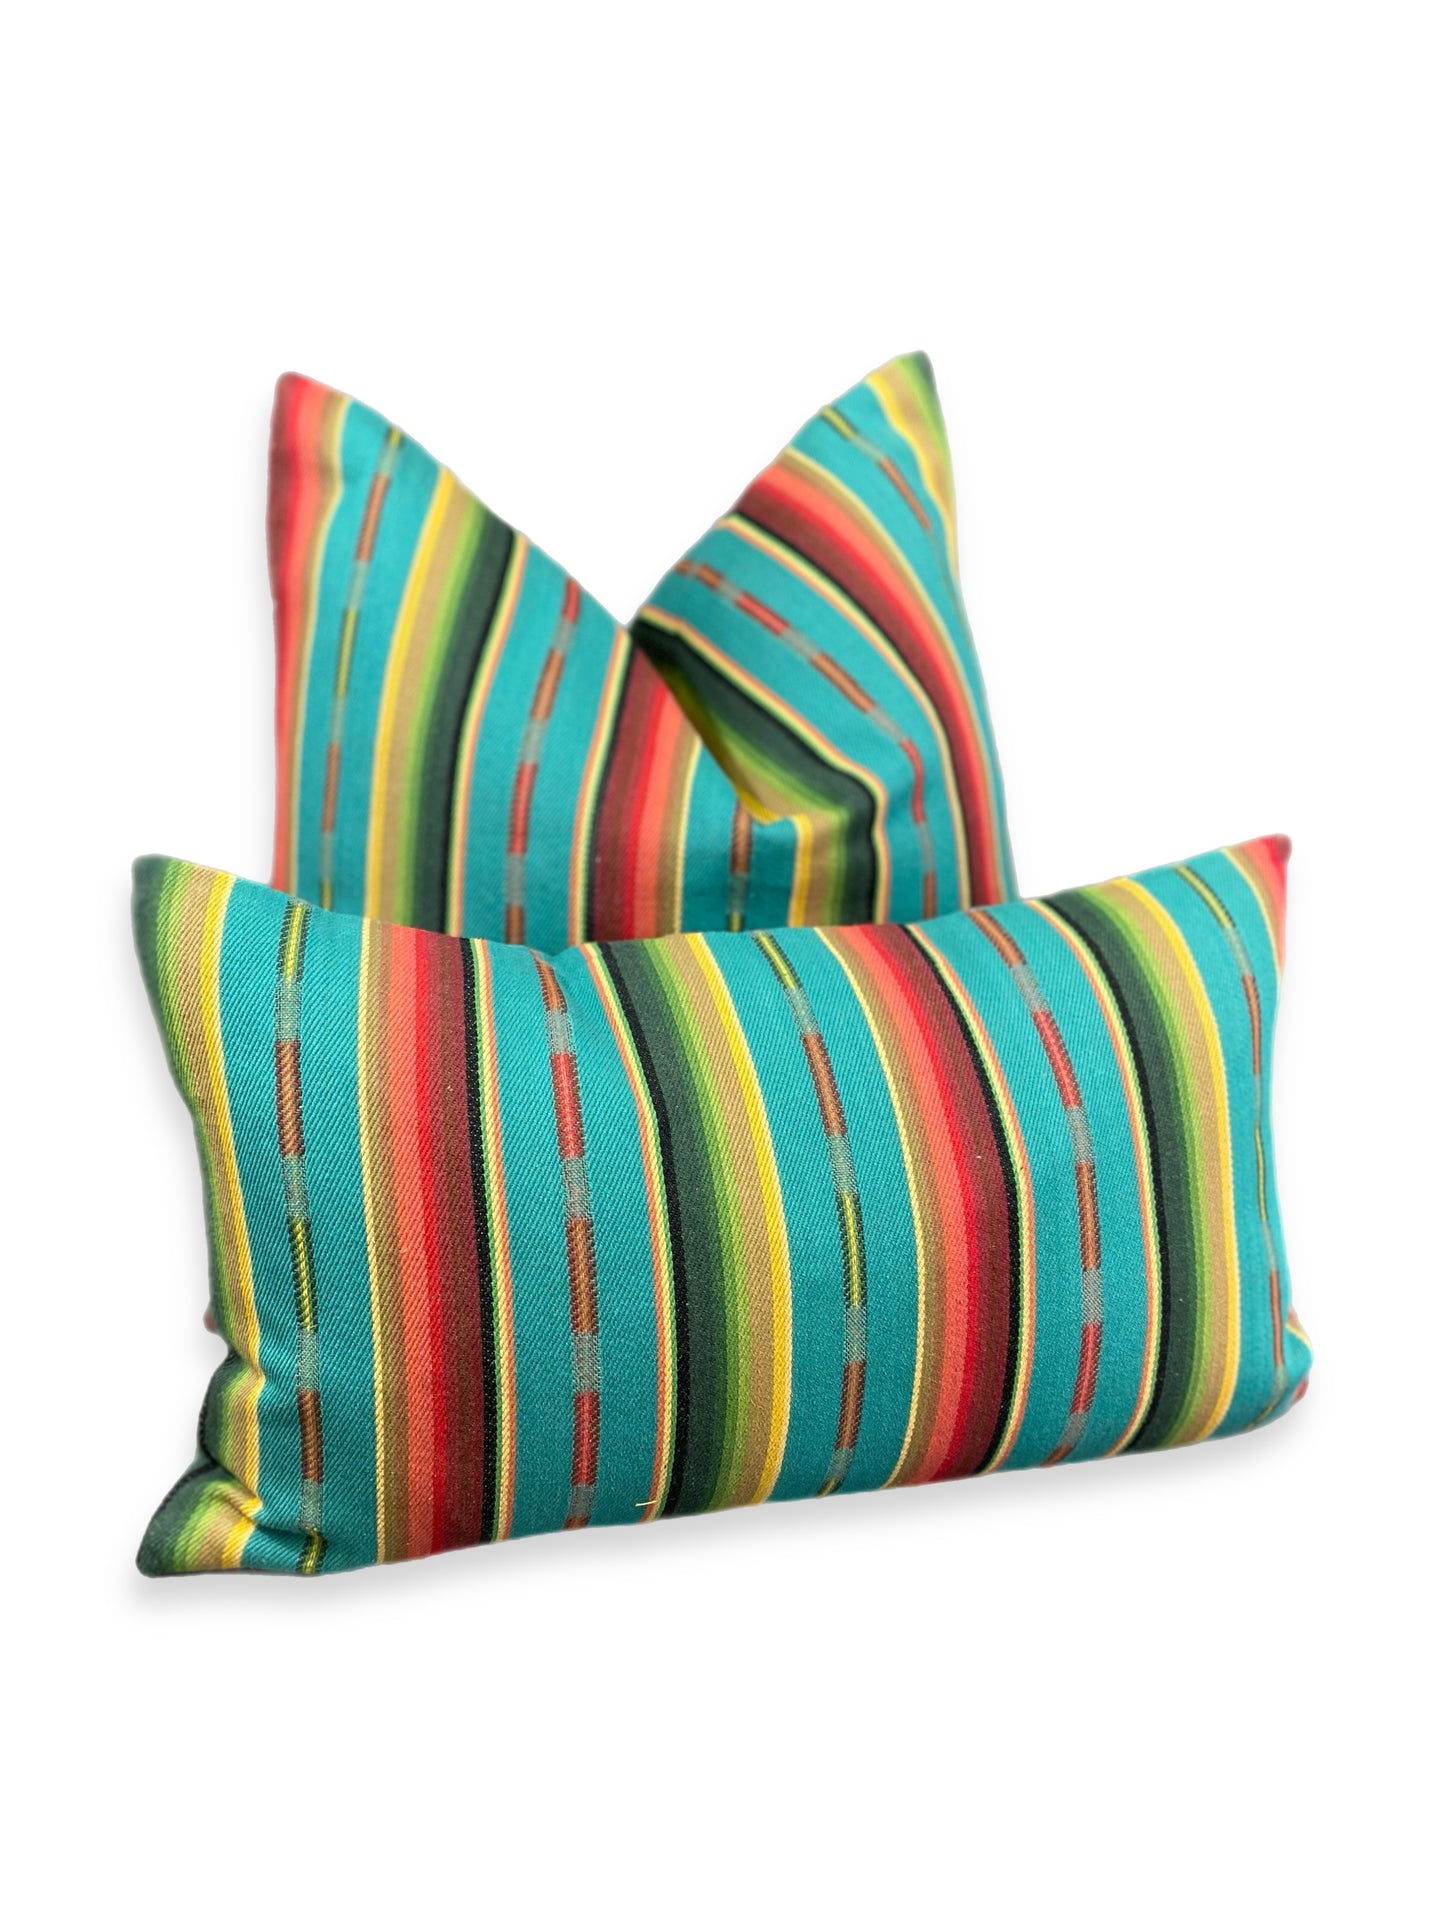 Luxury Lumbar Pillow - 24" x 14" - Native-Turquoise; beautiful woven stripes of turquoise, black, oranges, yellows, greens, blues, and reds